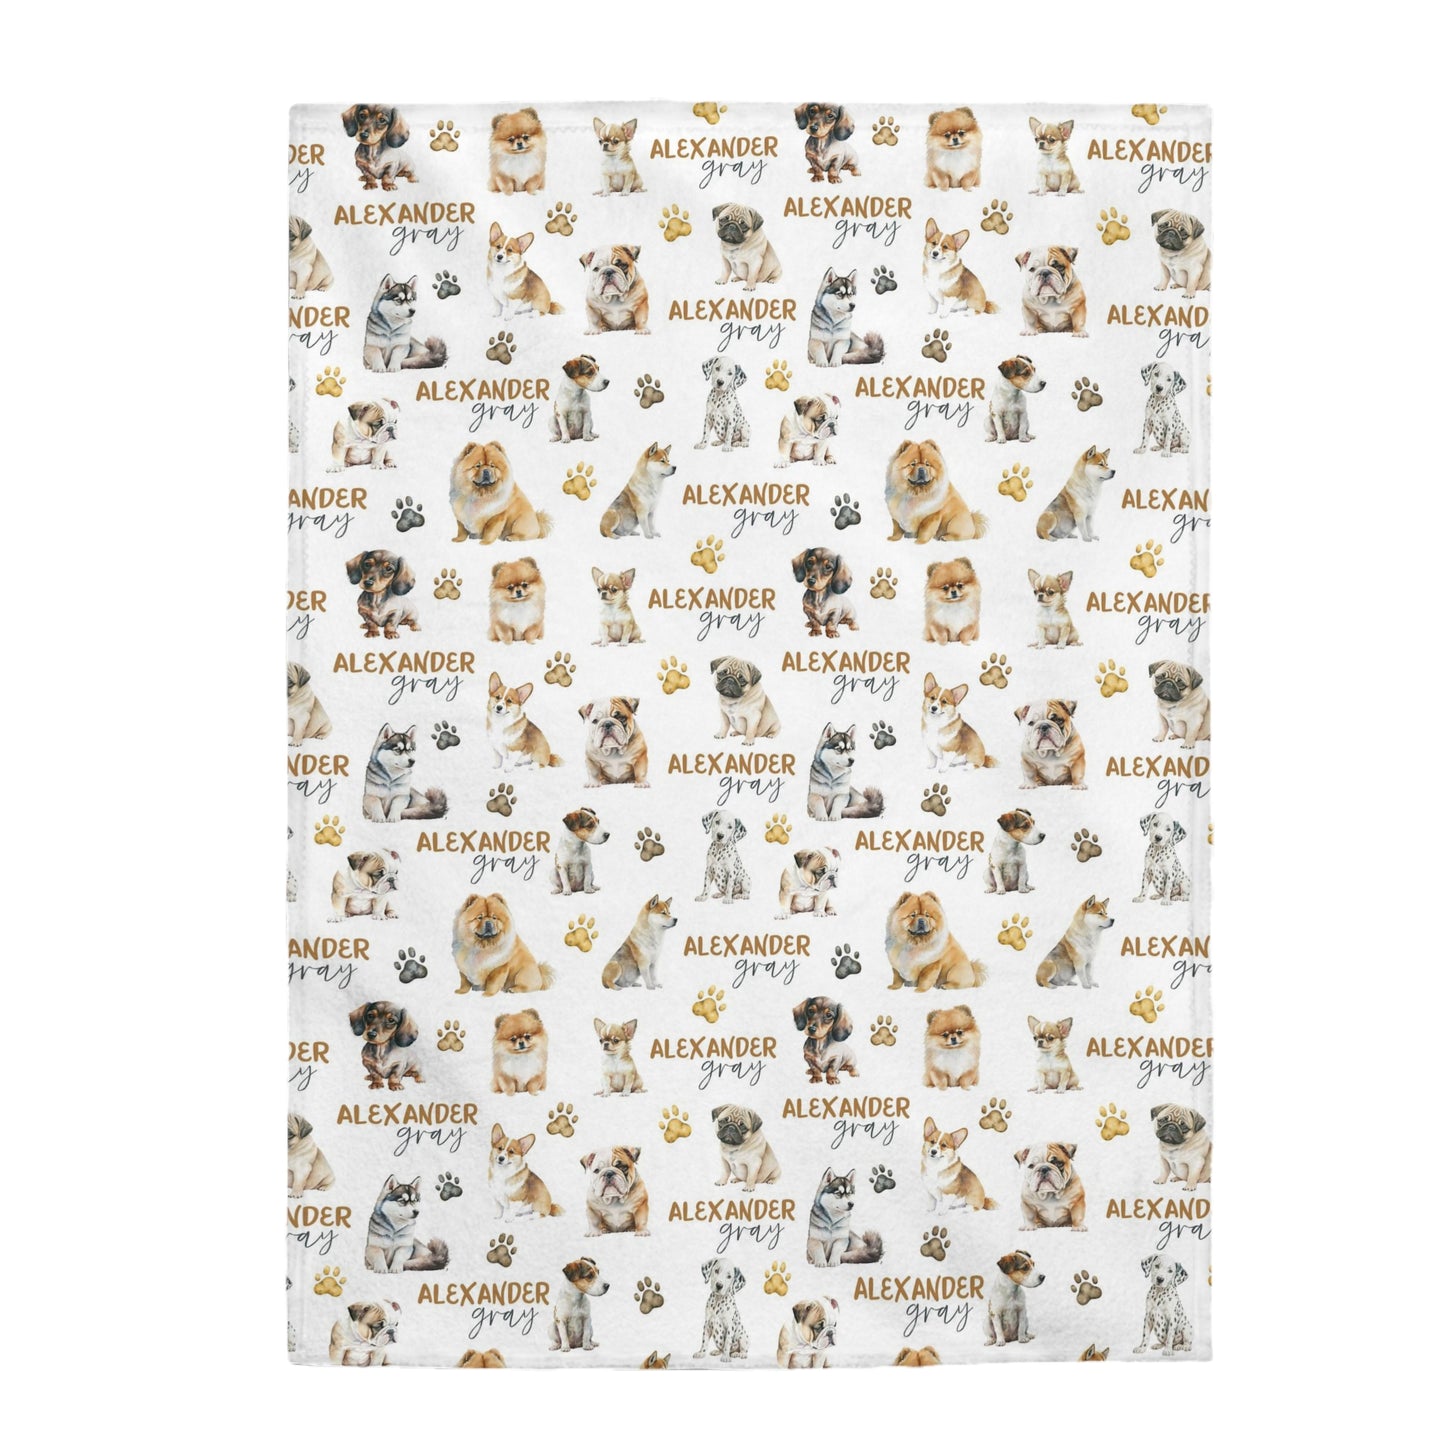 Personalized Puppy dogs Blanket, Dog Theme Bedding - Friends forever